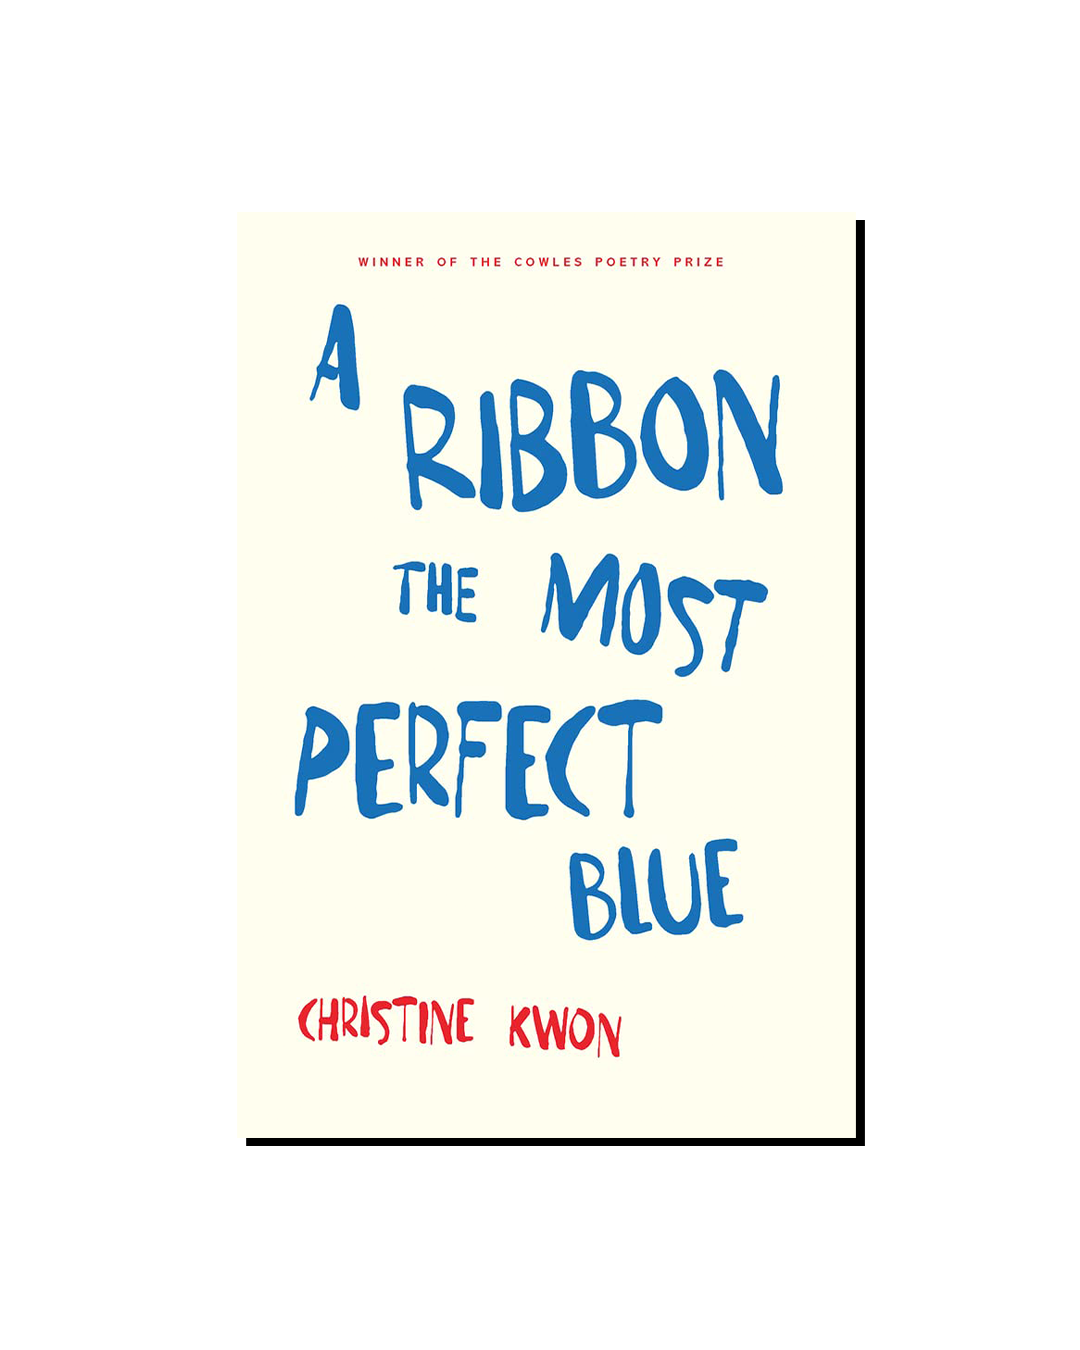 Still, Observing: On Christine Kwon's “A Ribbon The Most Perfect